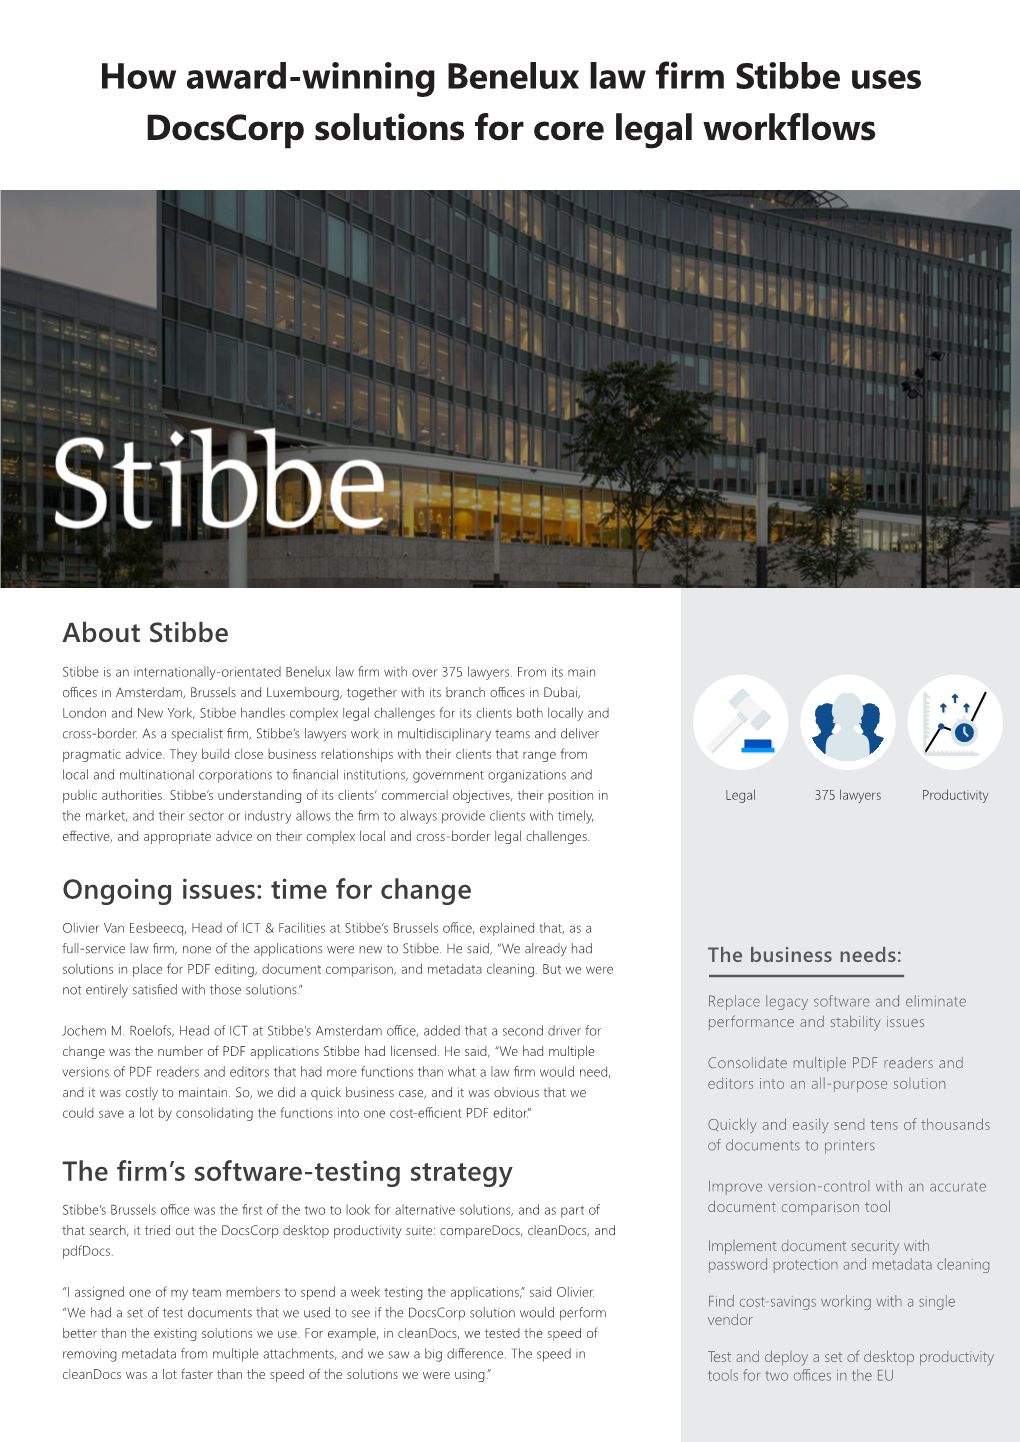 How Award-Winning Benelux Law Firm Stibbe Uses Docscorp Solutions for Core Legal Workflows